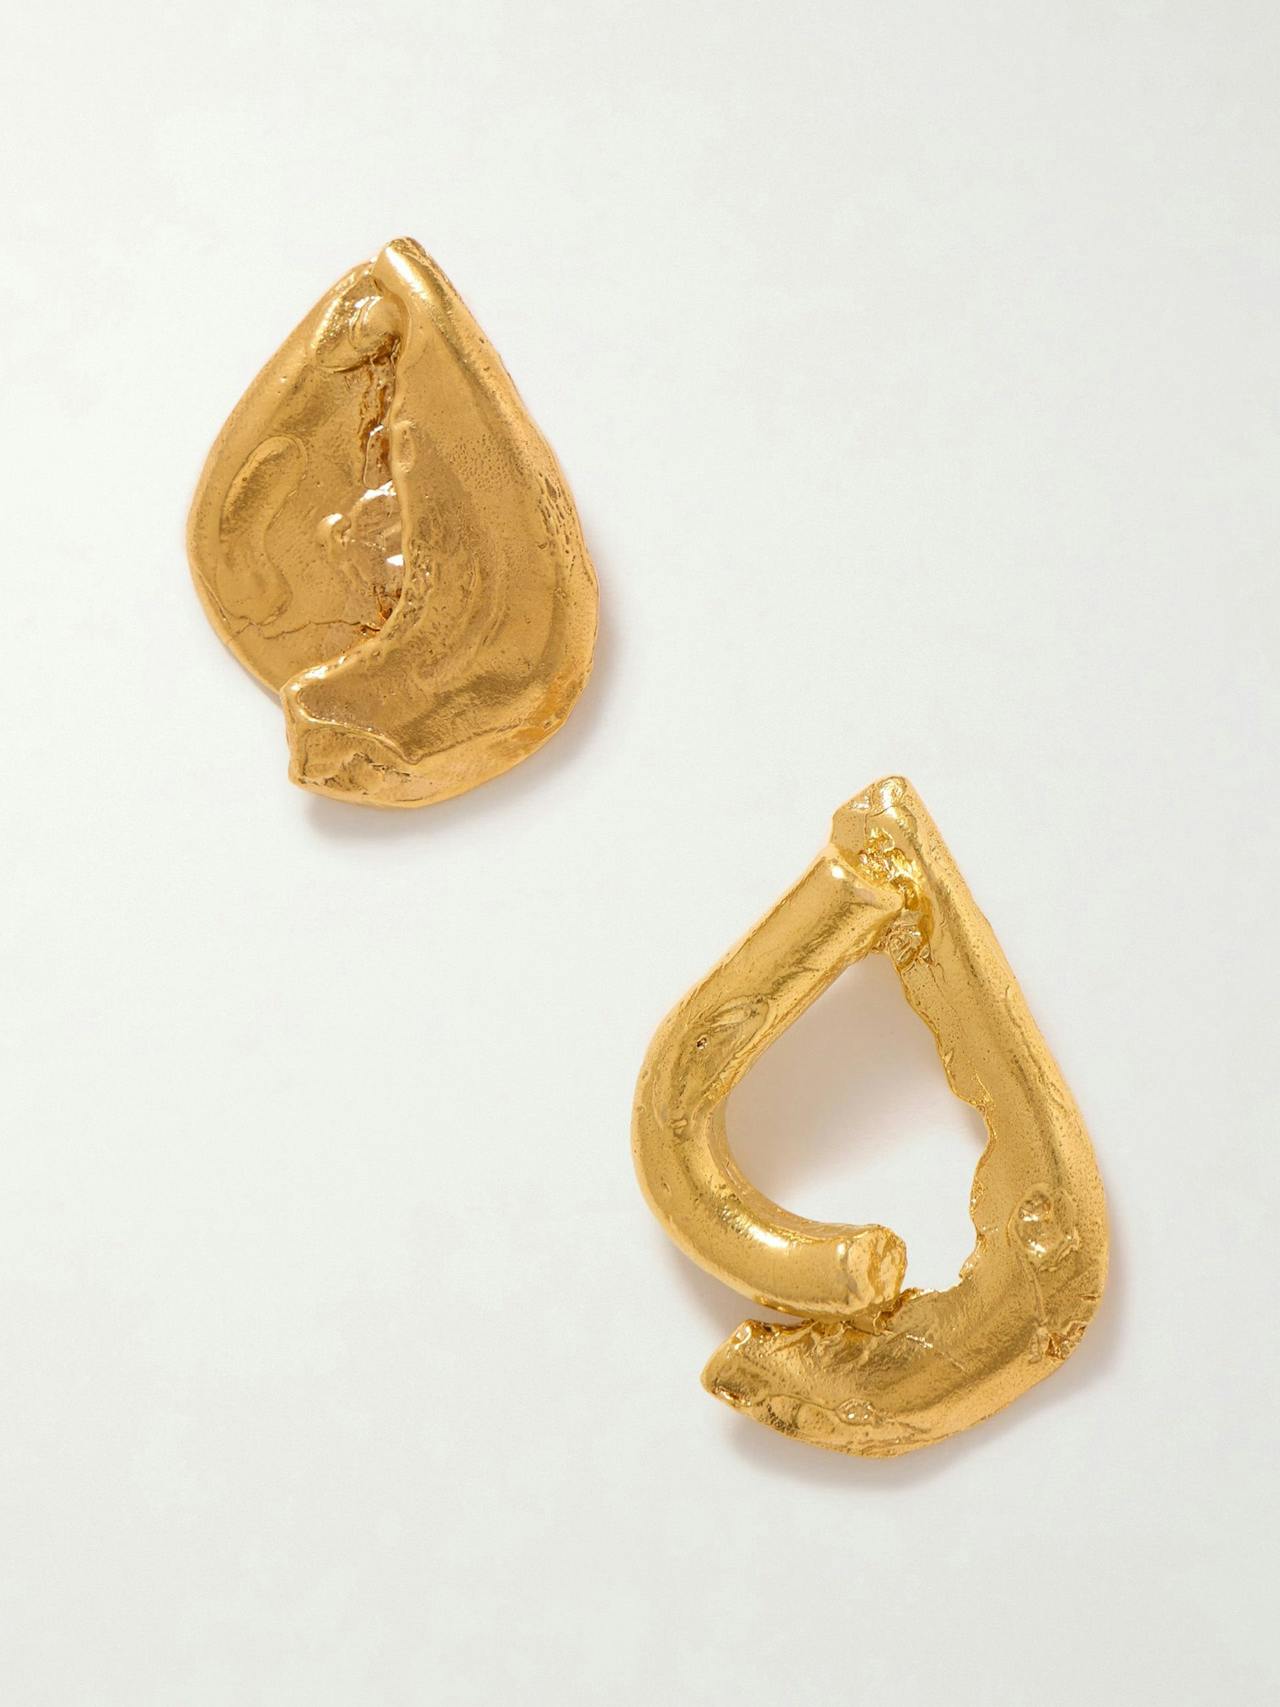 The Warrior gold-plated earrings